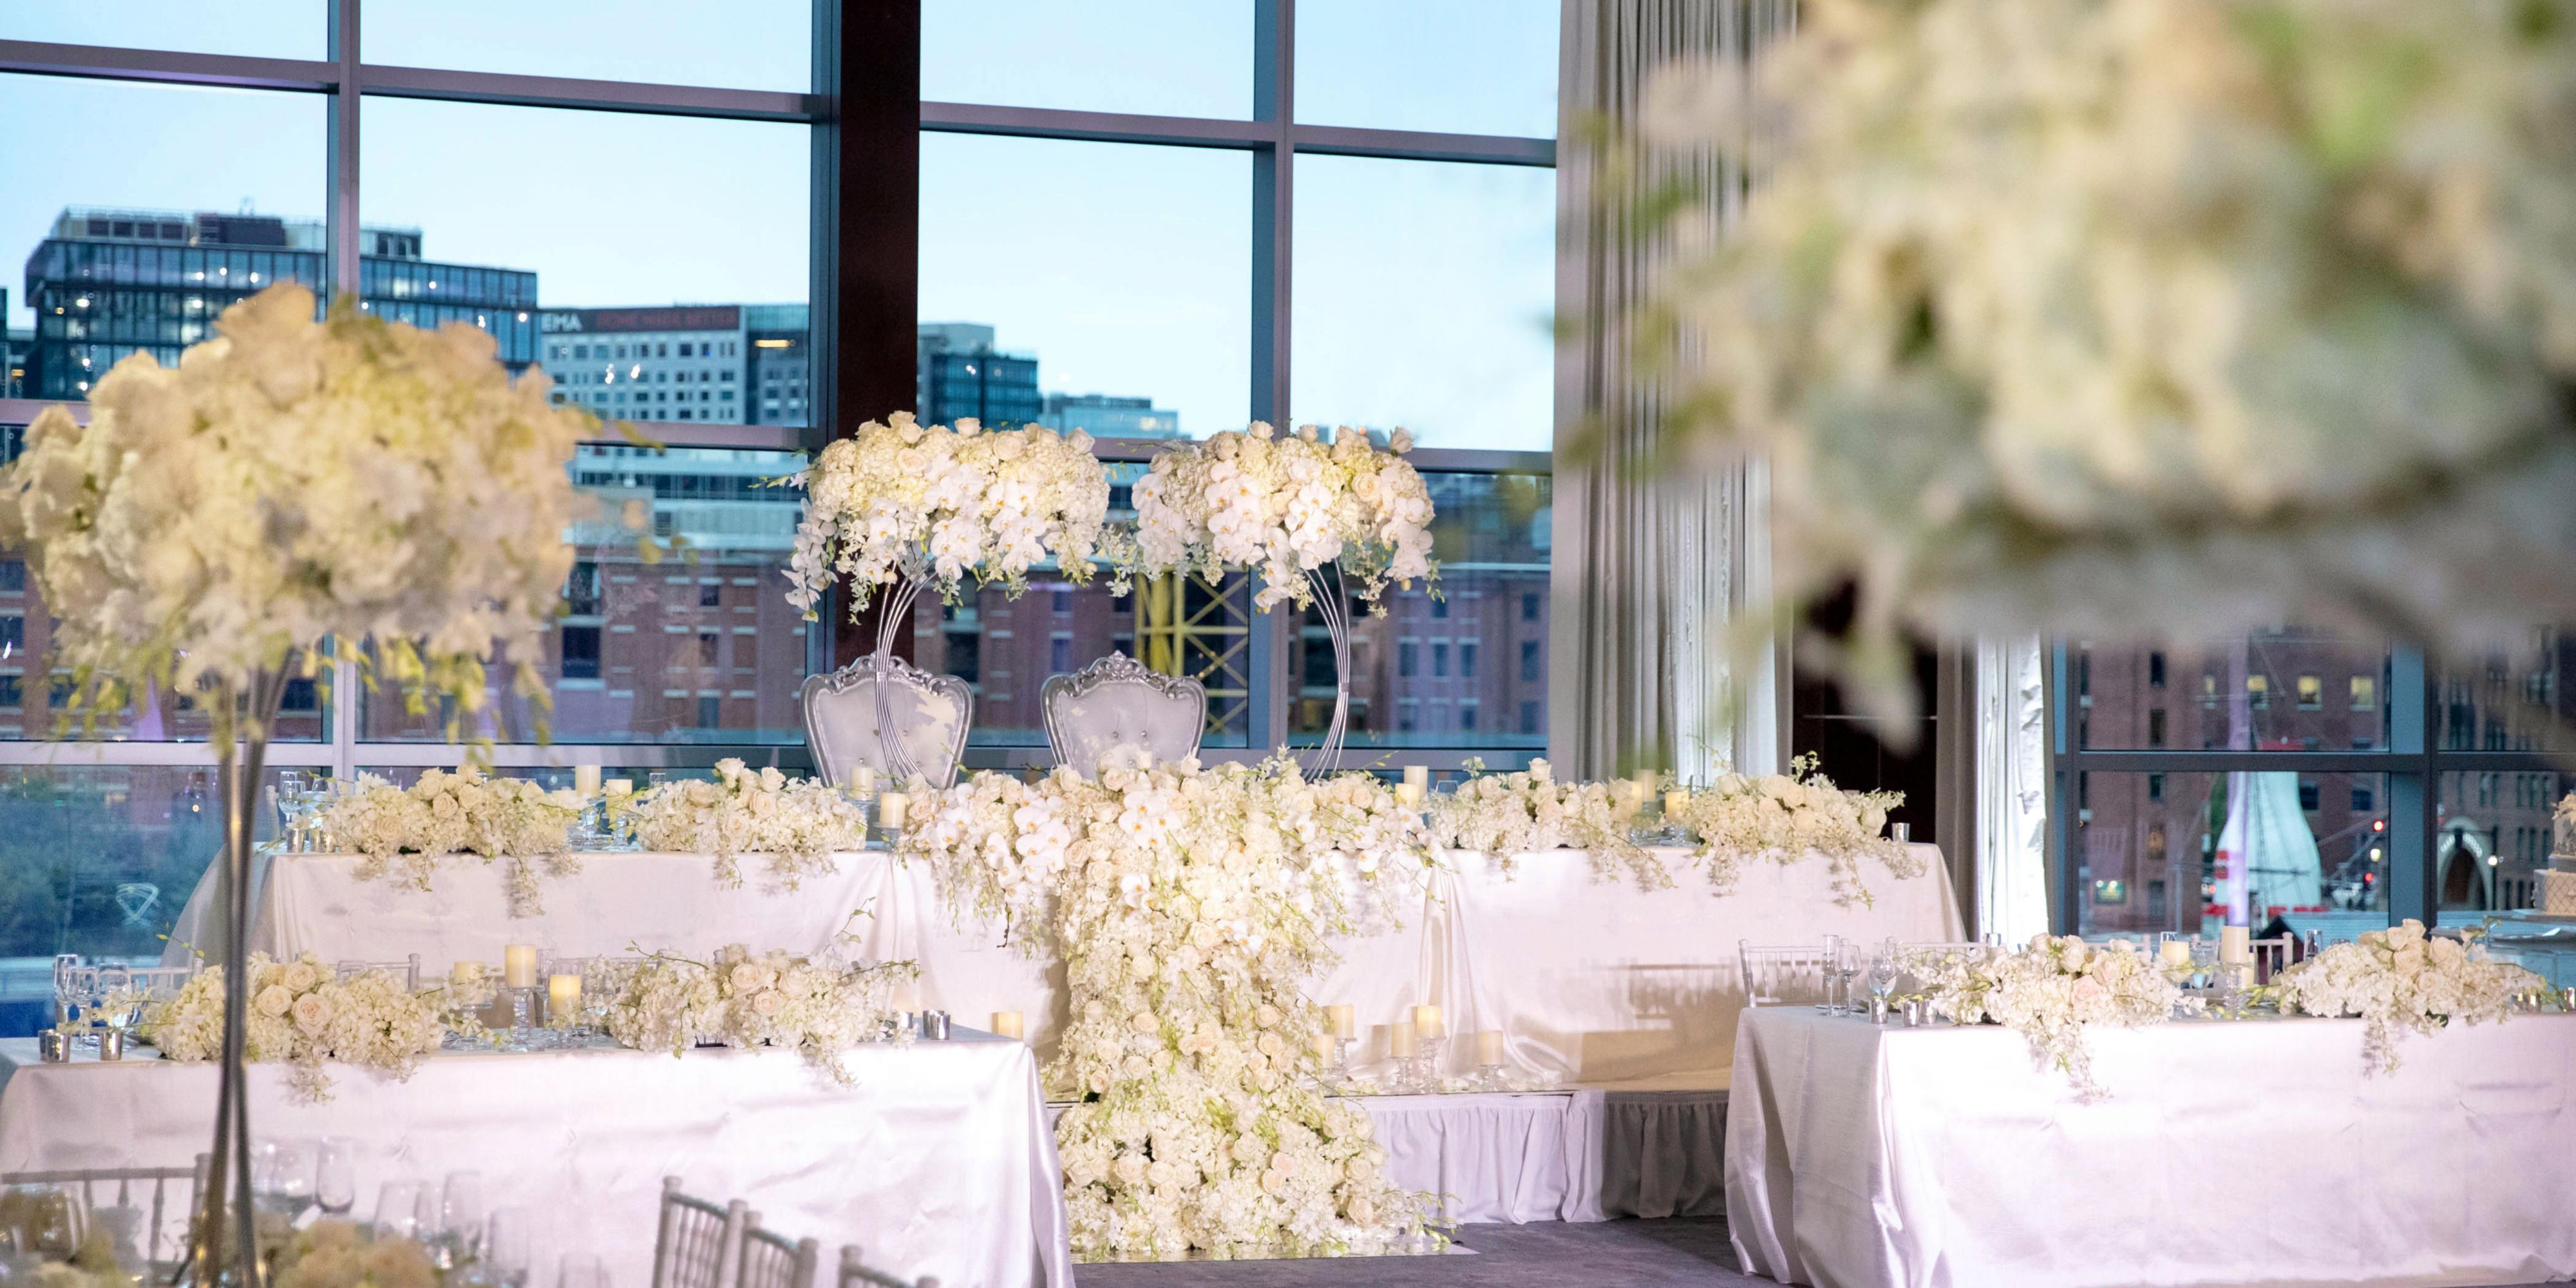 Your special day. Our waterfront wedding venue. Our hotel offers beautiful event spaces, including the Abigail Adams Ballroom and Rose Kennedy Ballroom, with floor-to-ceiling windows overlooking Fort Point Channel and the Seaport District. Our events team is here to help you make your wedding day unforgettable. 